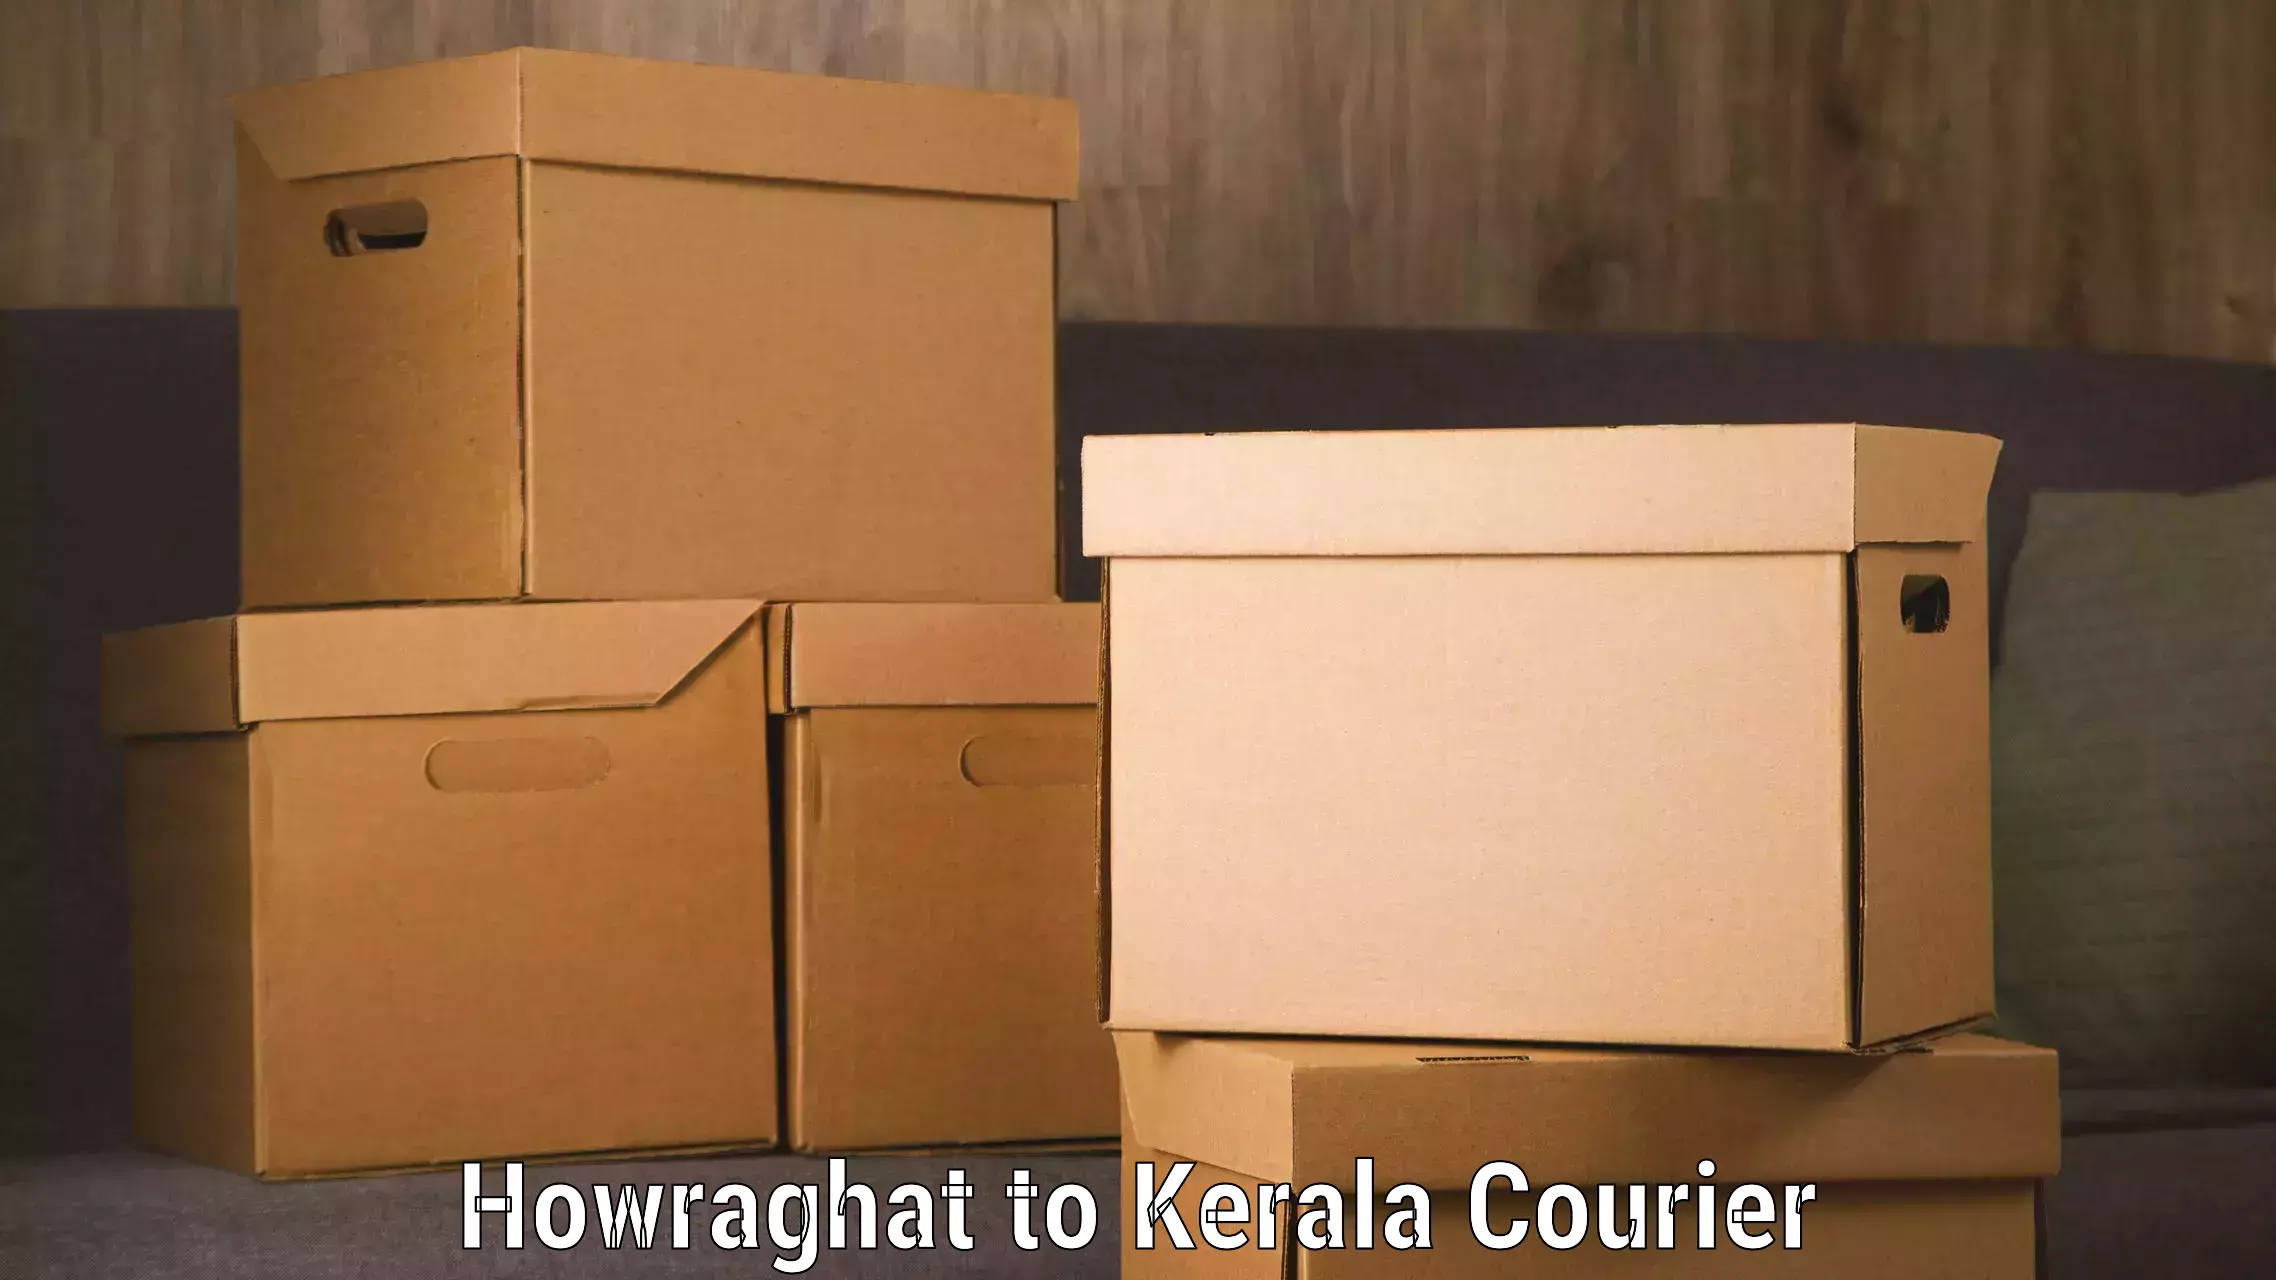 Luggage transport solutions Howraghat to Kerala